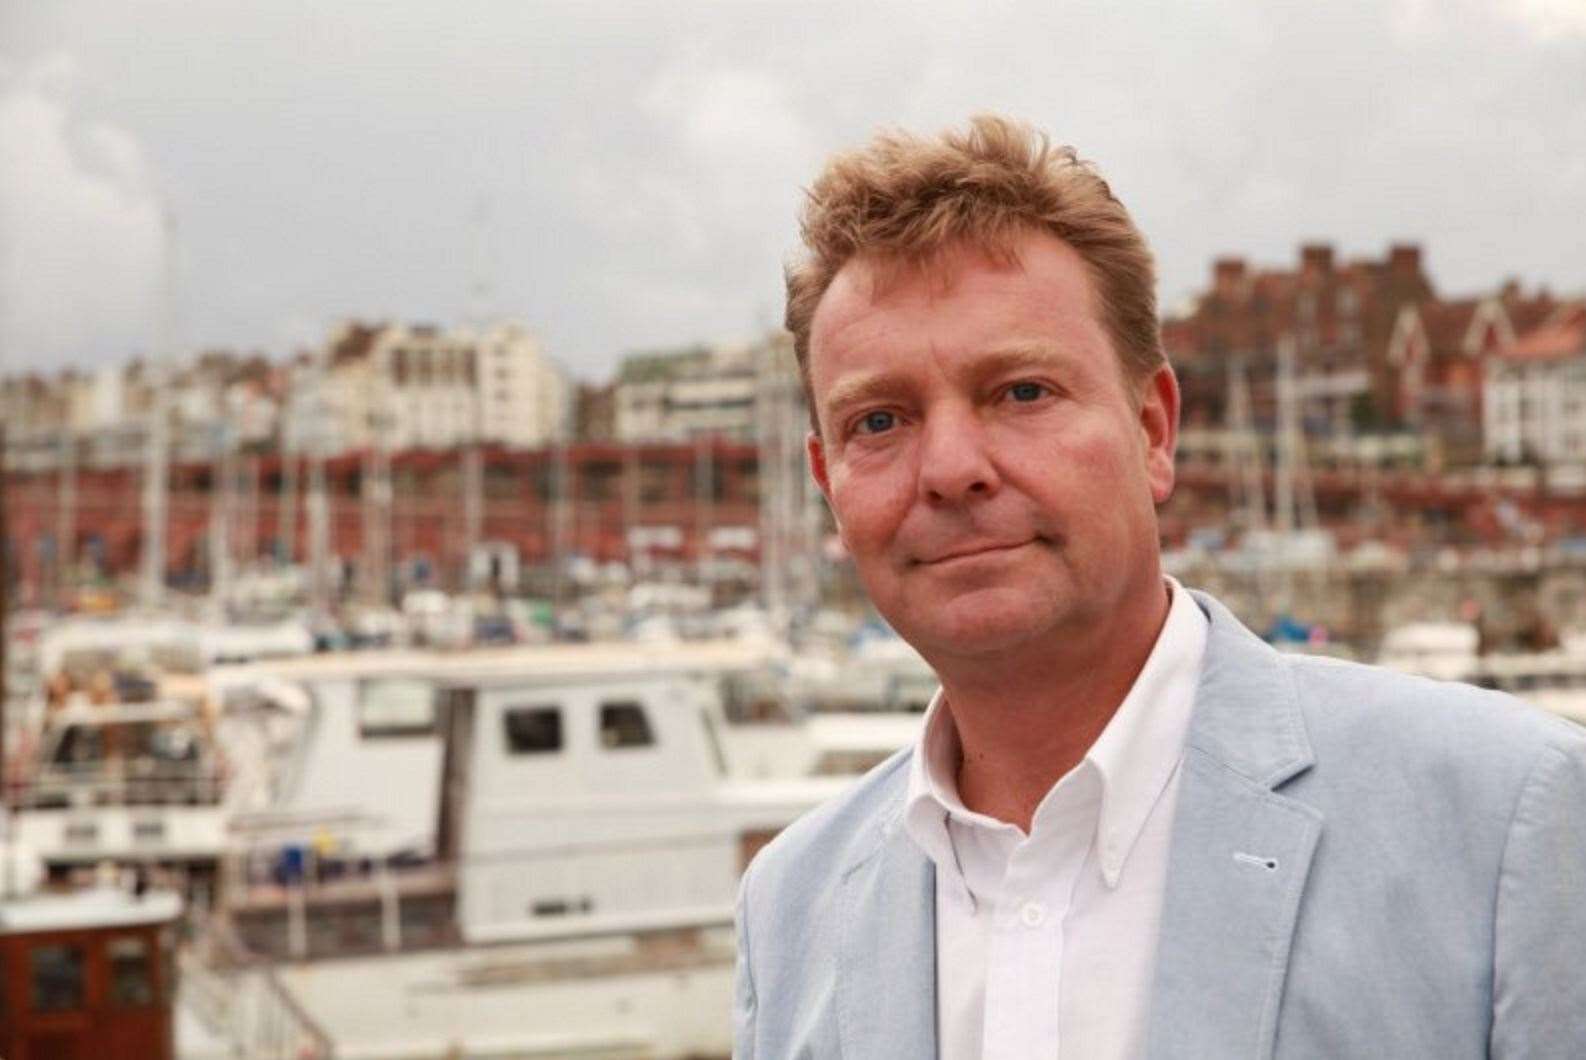 Craig Mackinlay, MP for South Thanet